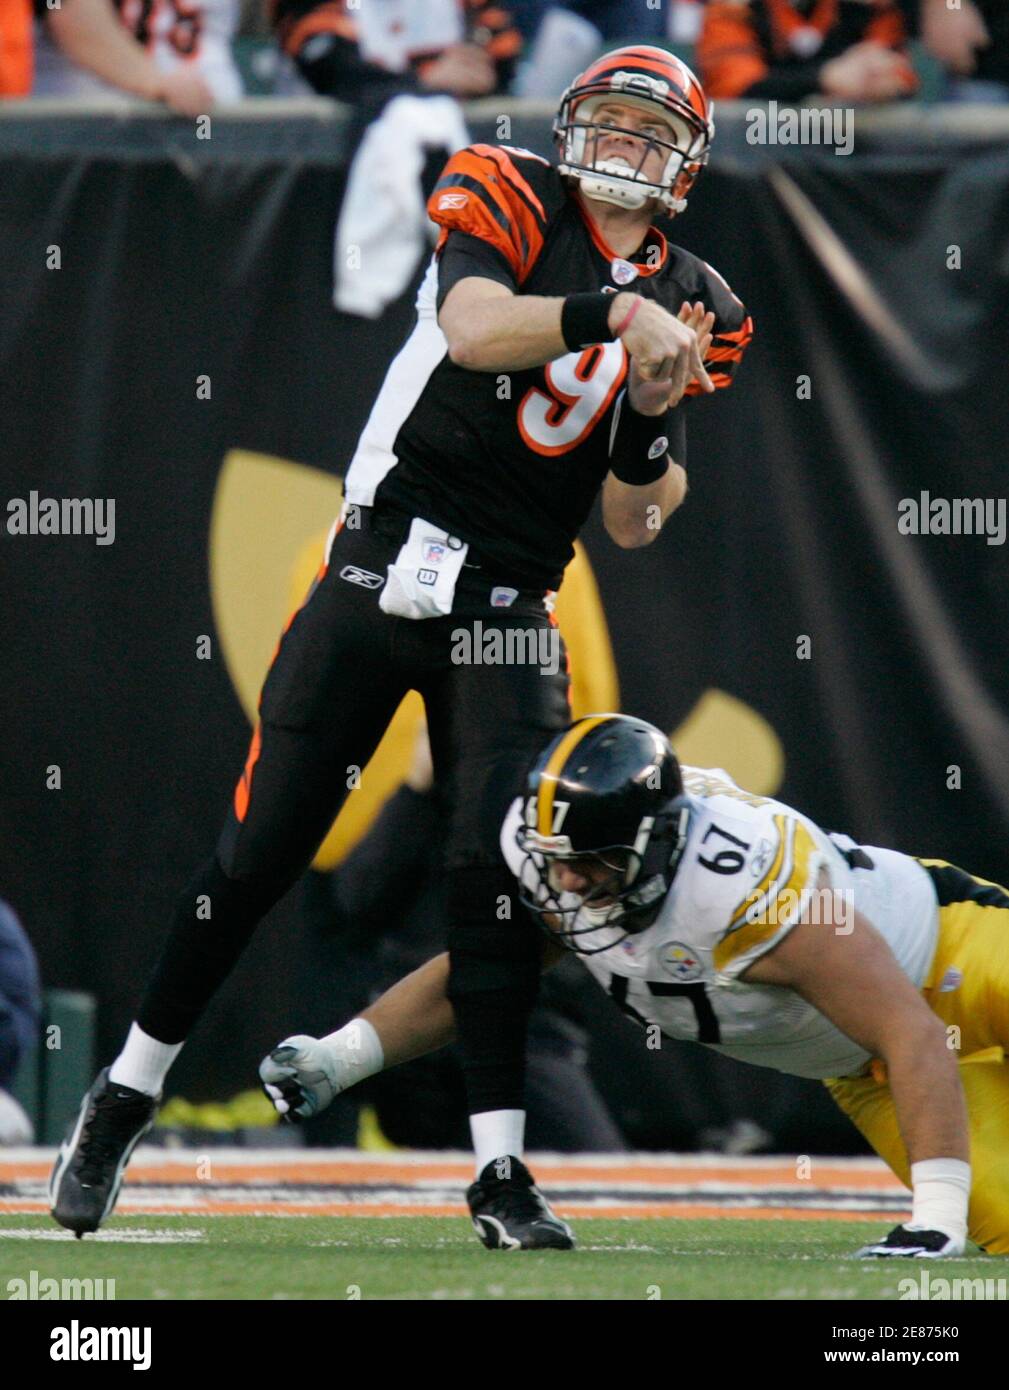 Cincinnati Bengals quarterback Carson Palmer (L) gets hit by Pittsburgh  Steelers defensive end Kimo von Oelhoffen during the first half of their  AFC Wildcard playoff game in Cincinnati, Ohio January 8, 2006.